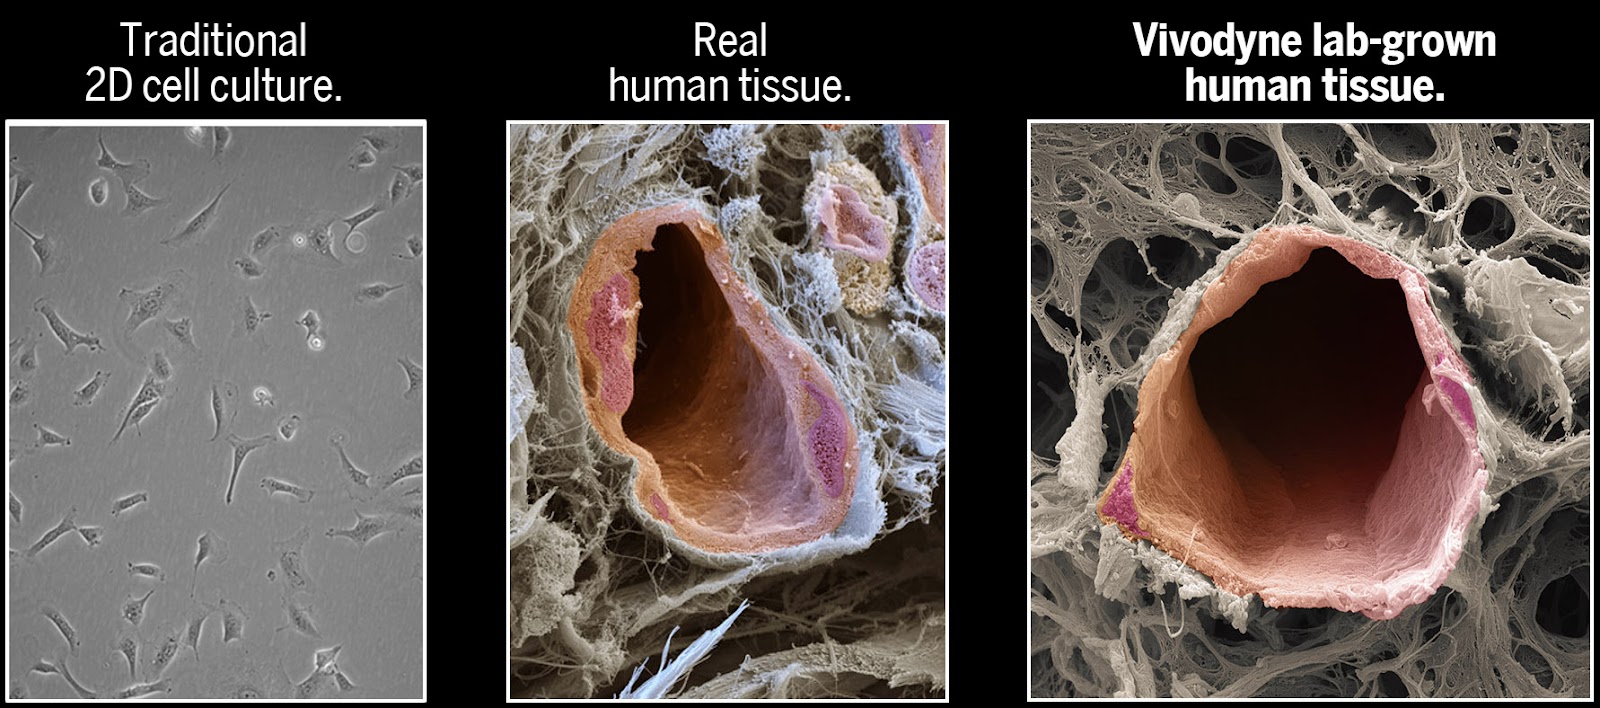 A high-magnification comparison cells in a petri dish (left), a blood vessel within native human tissue (middle). and Vivodyne’s lab-grown human tissue (right)